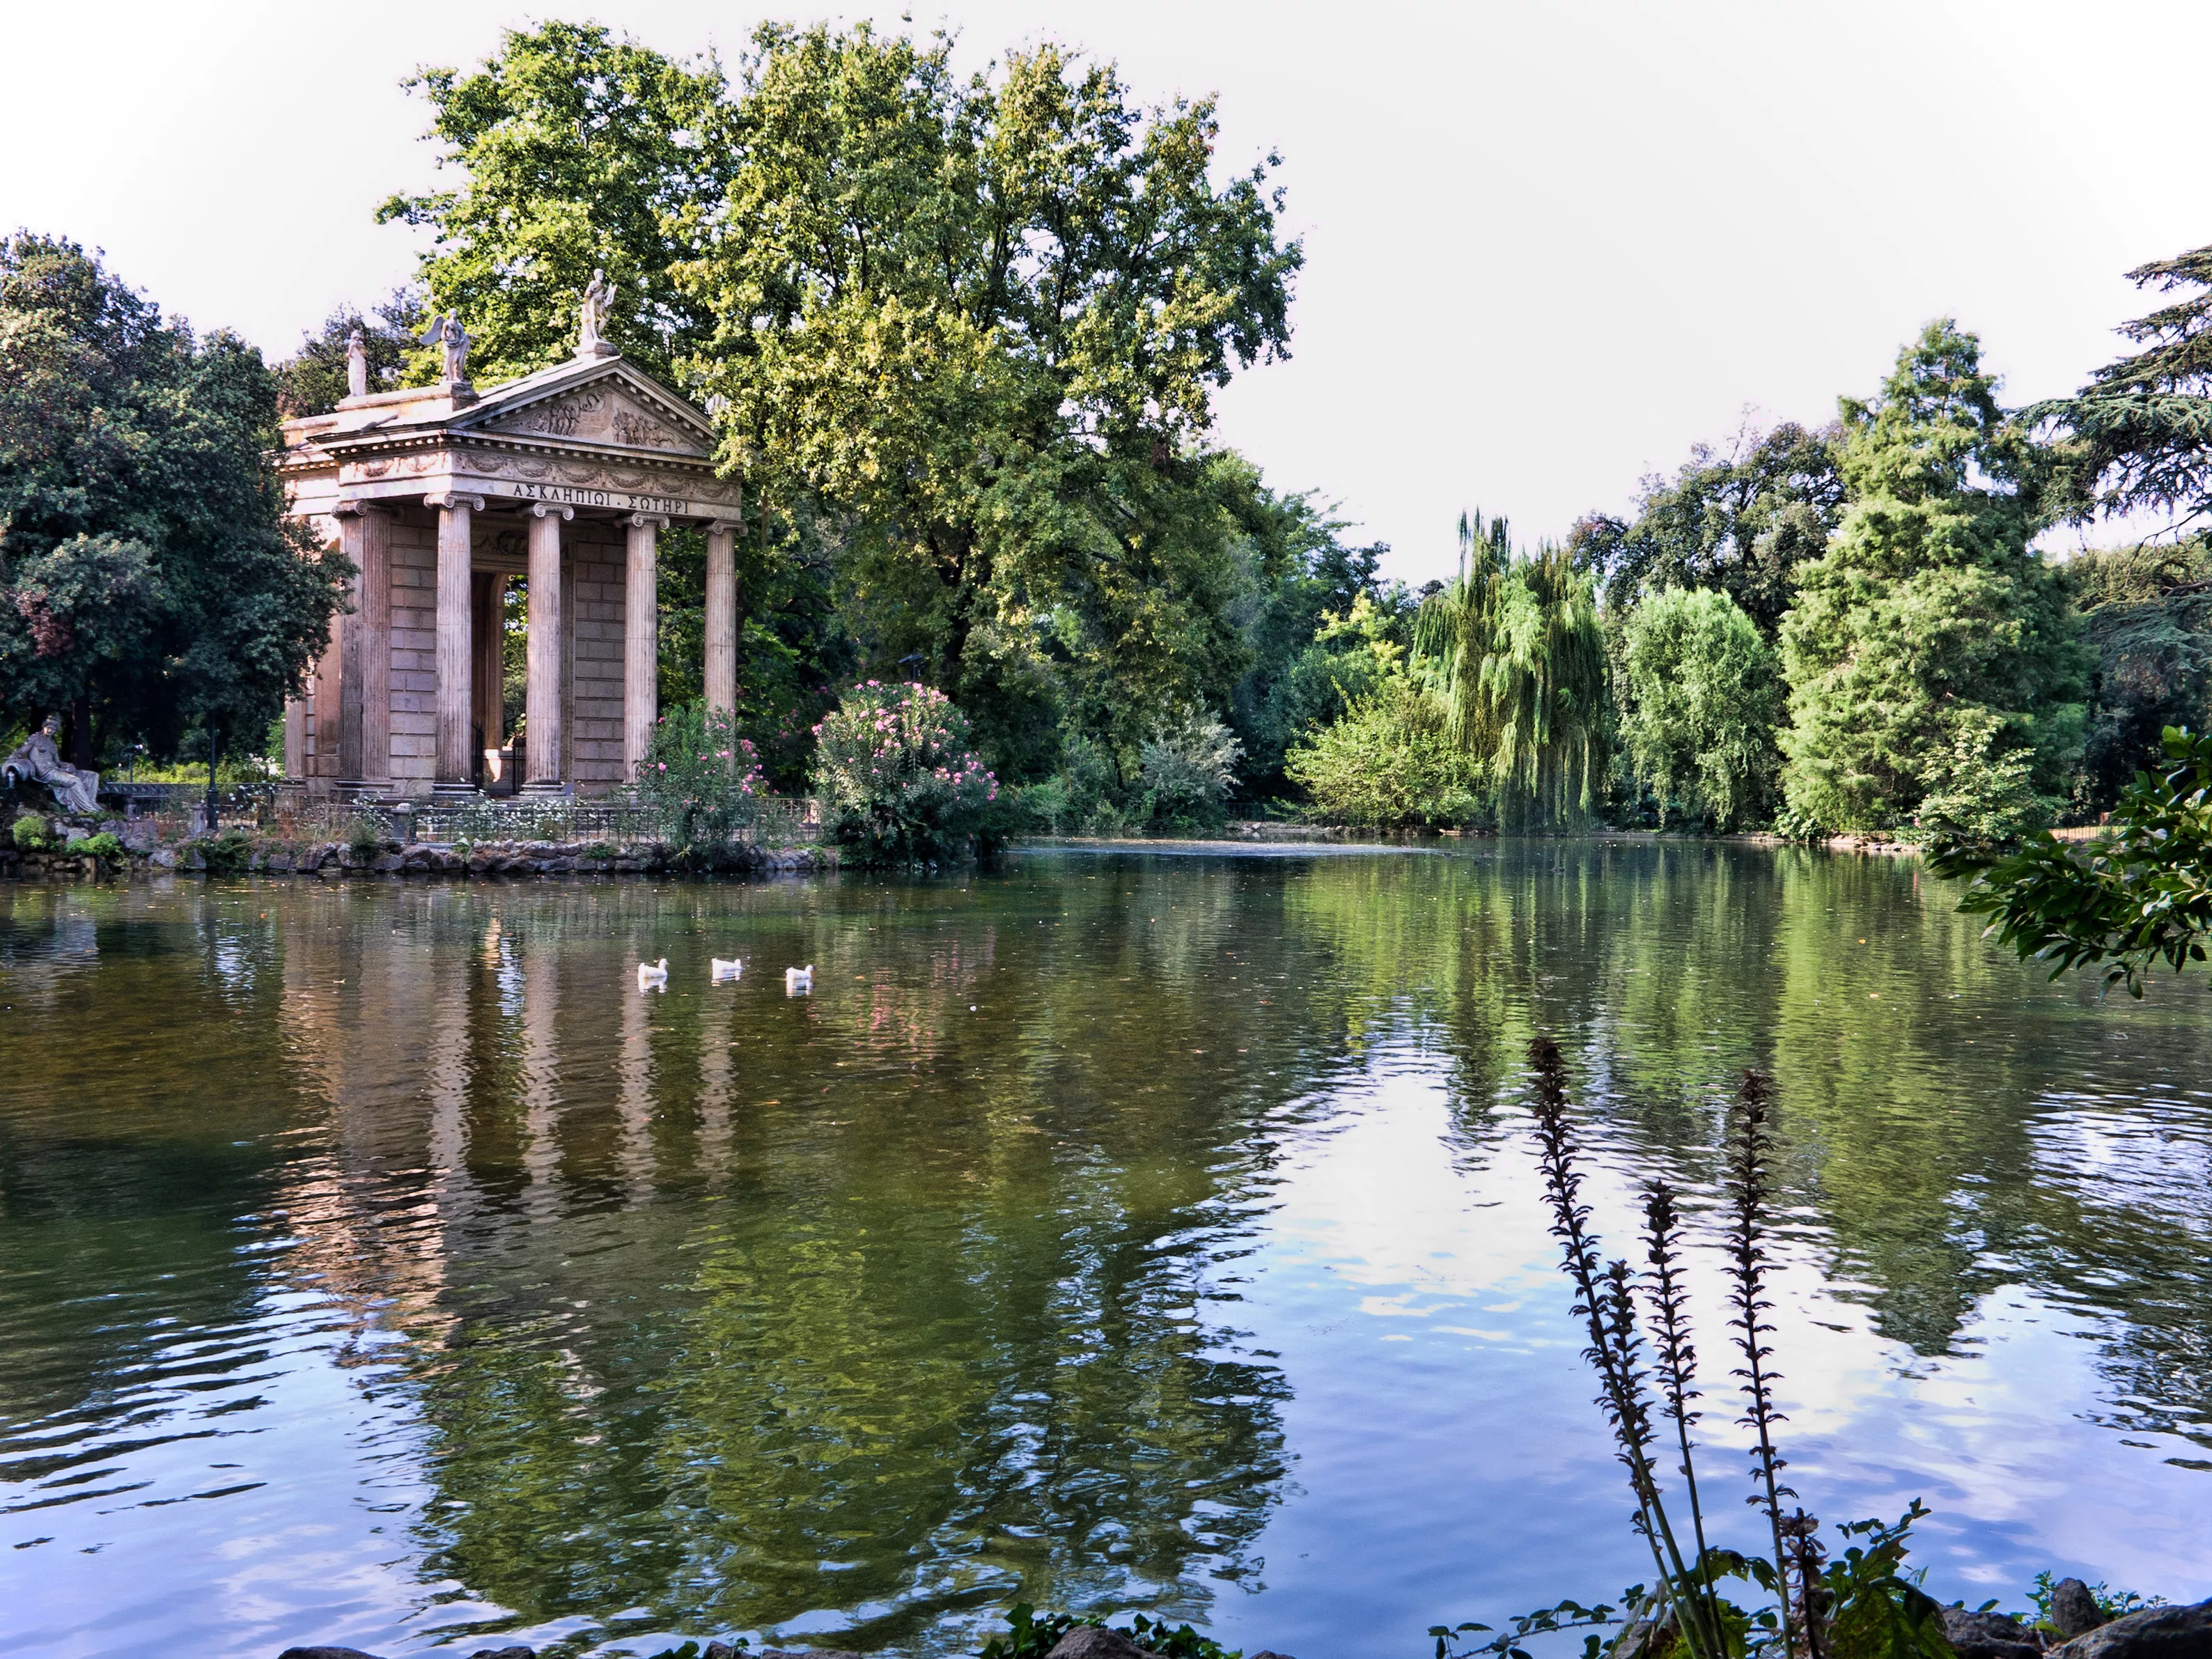 Villa Borghese in Italy, Europe | Parks - Rated 5.1